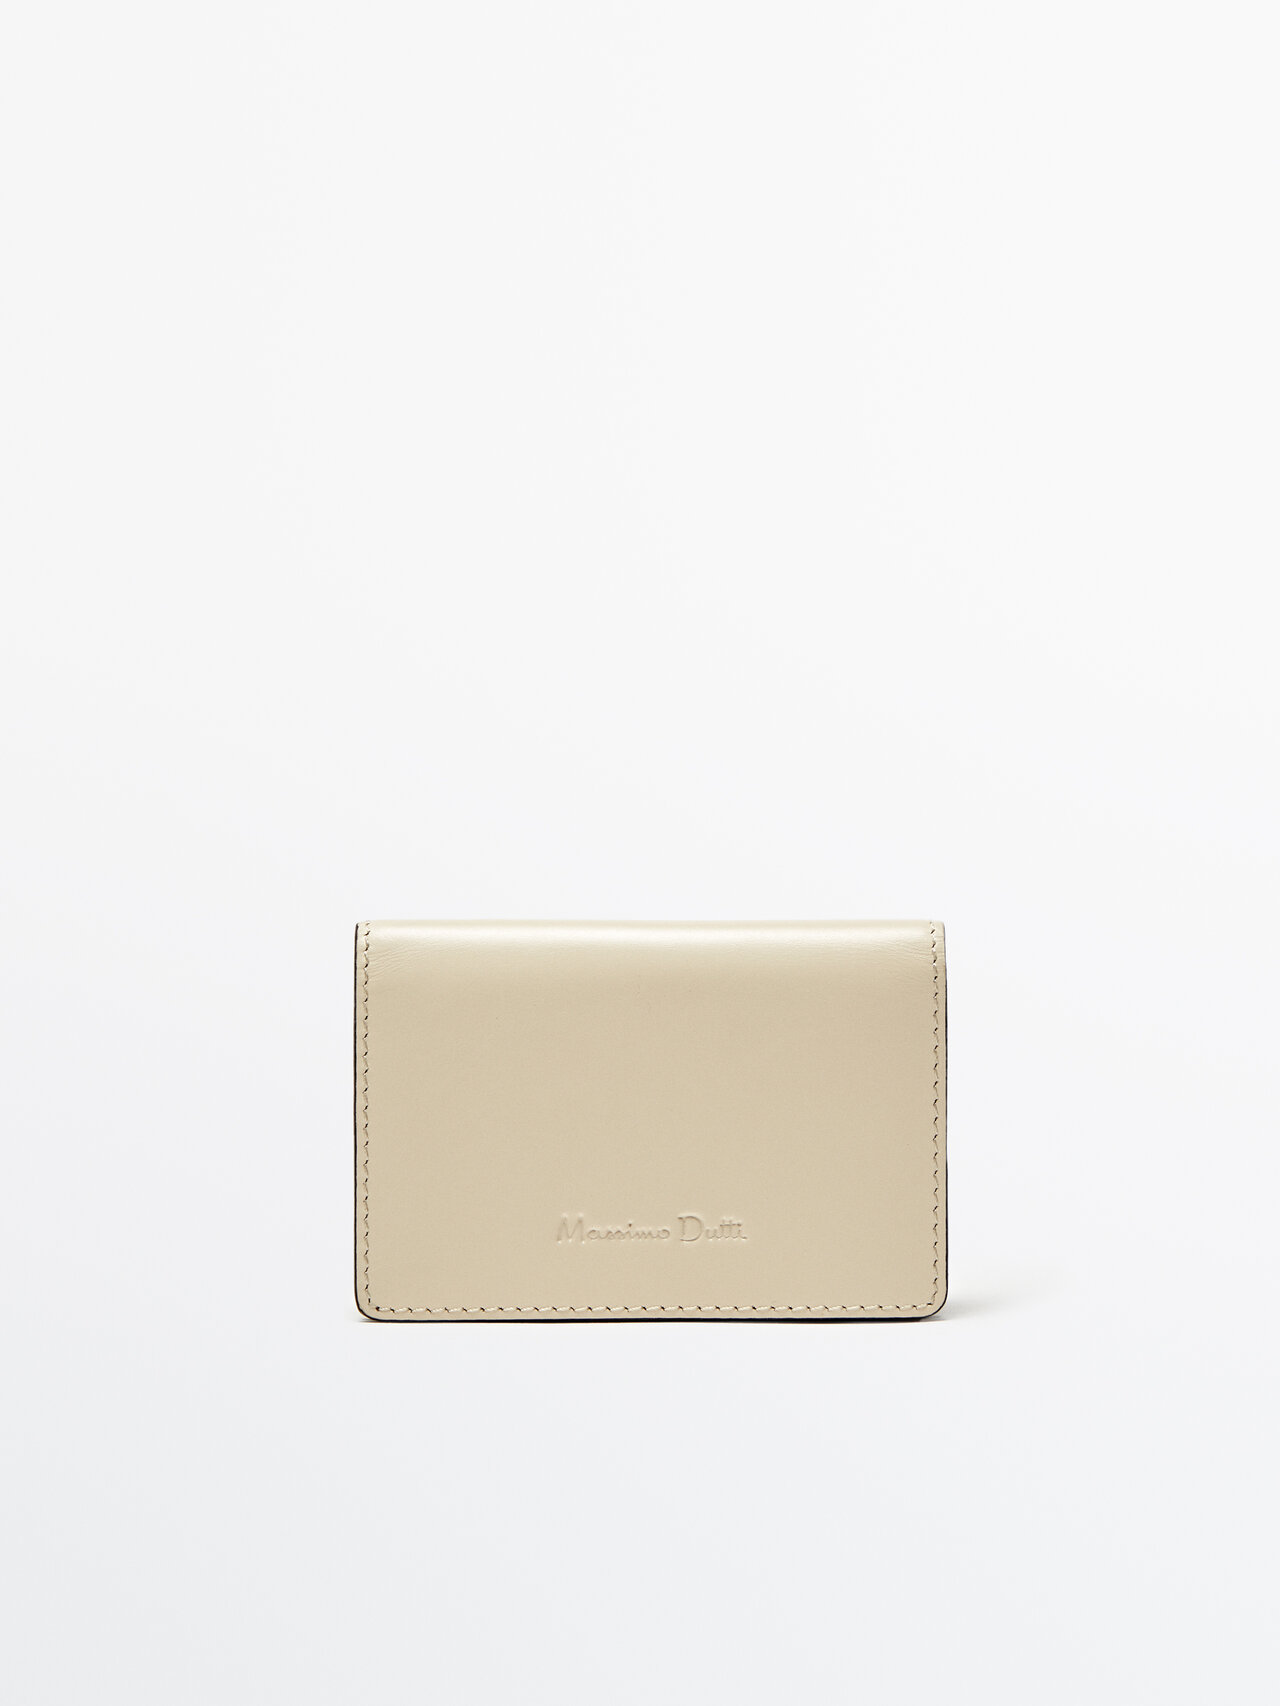 Massimo Dutti Nappa Leather Wallet In White